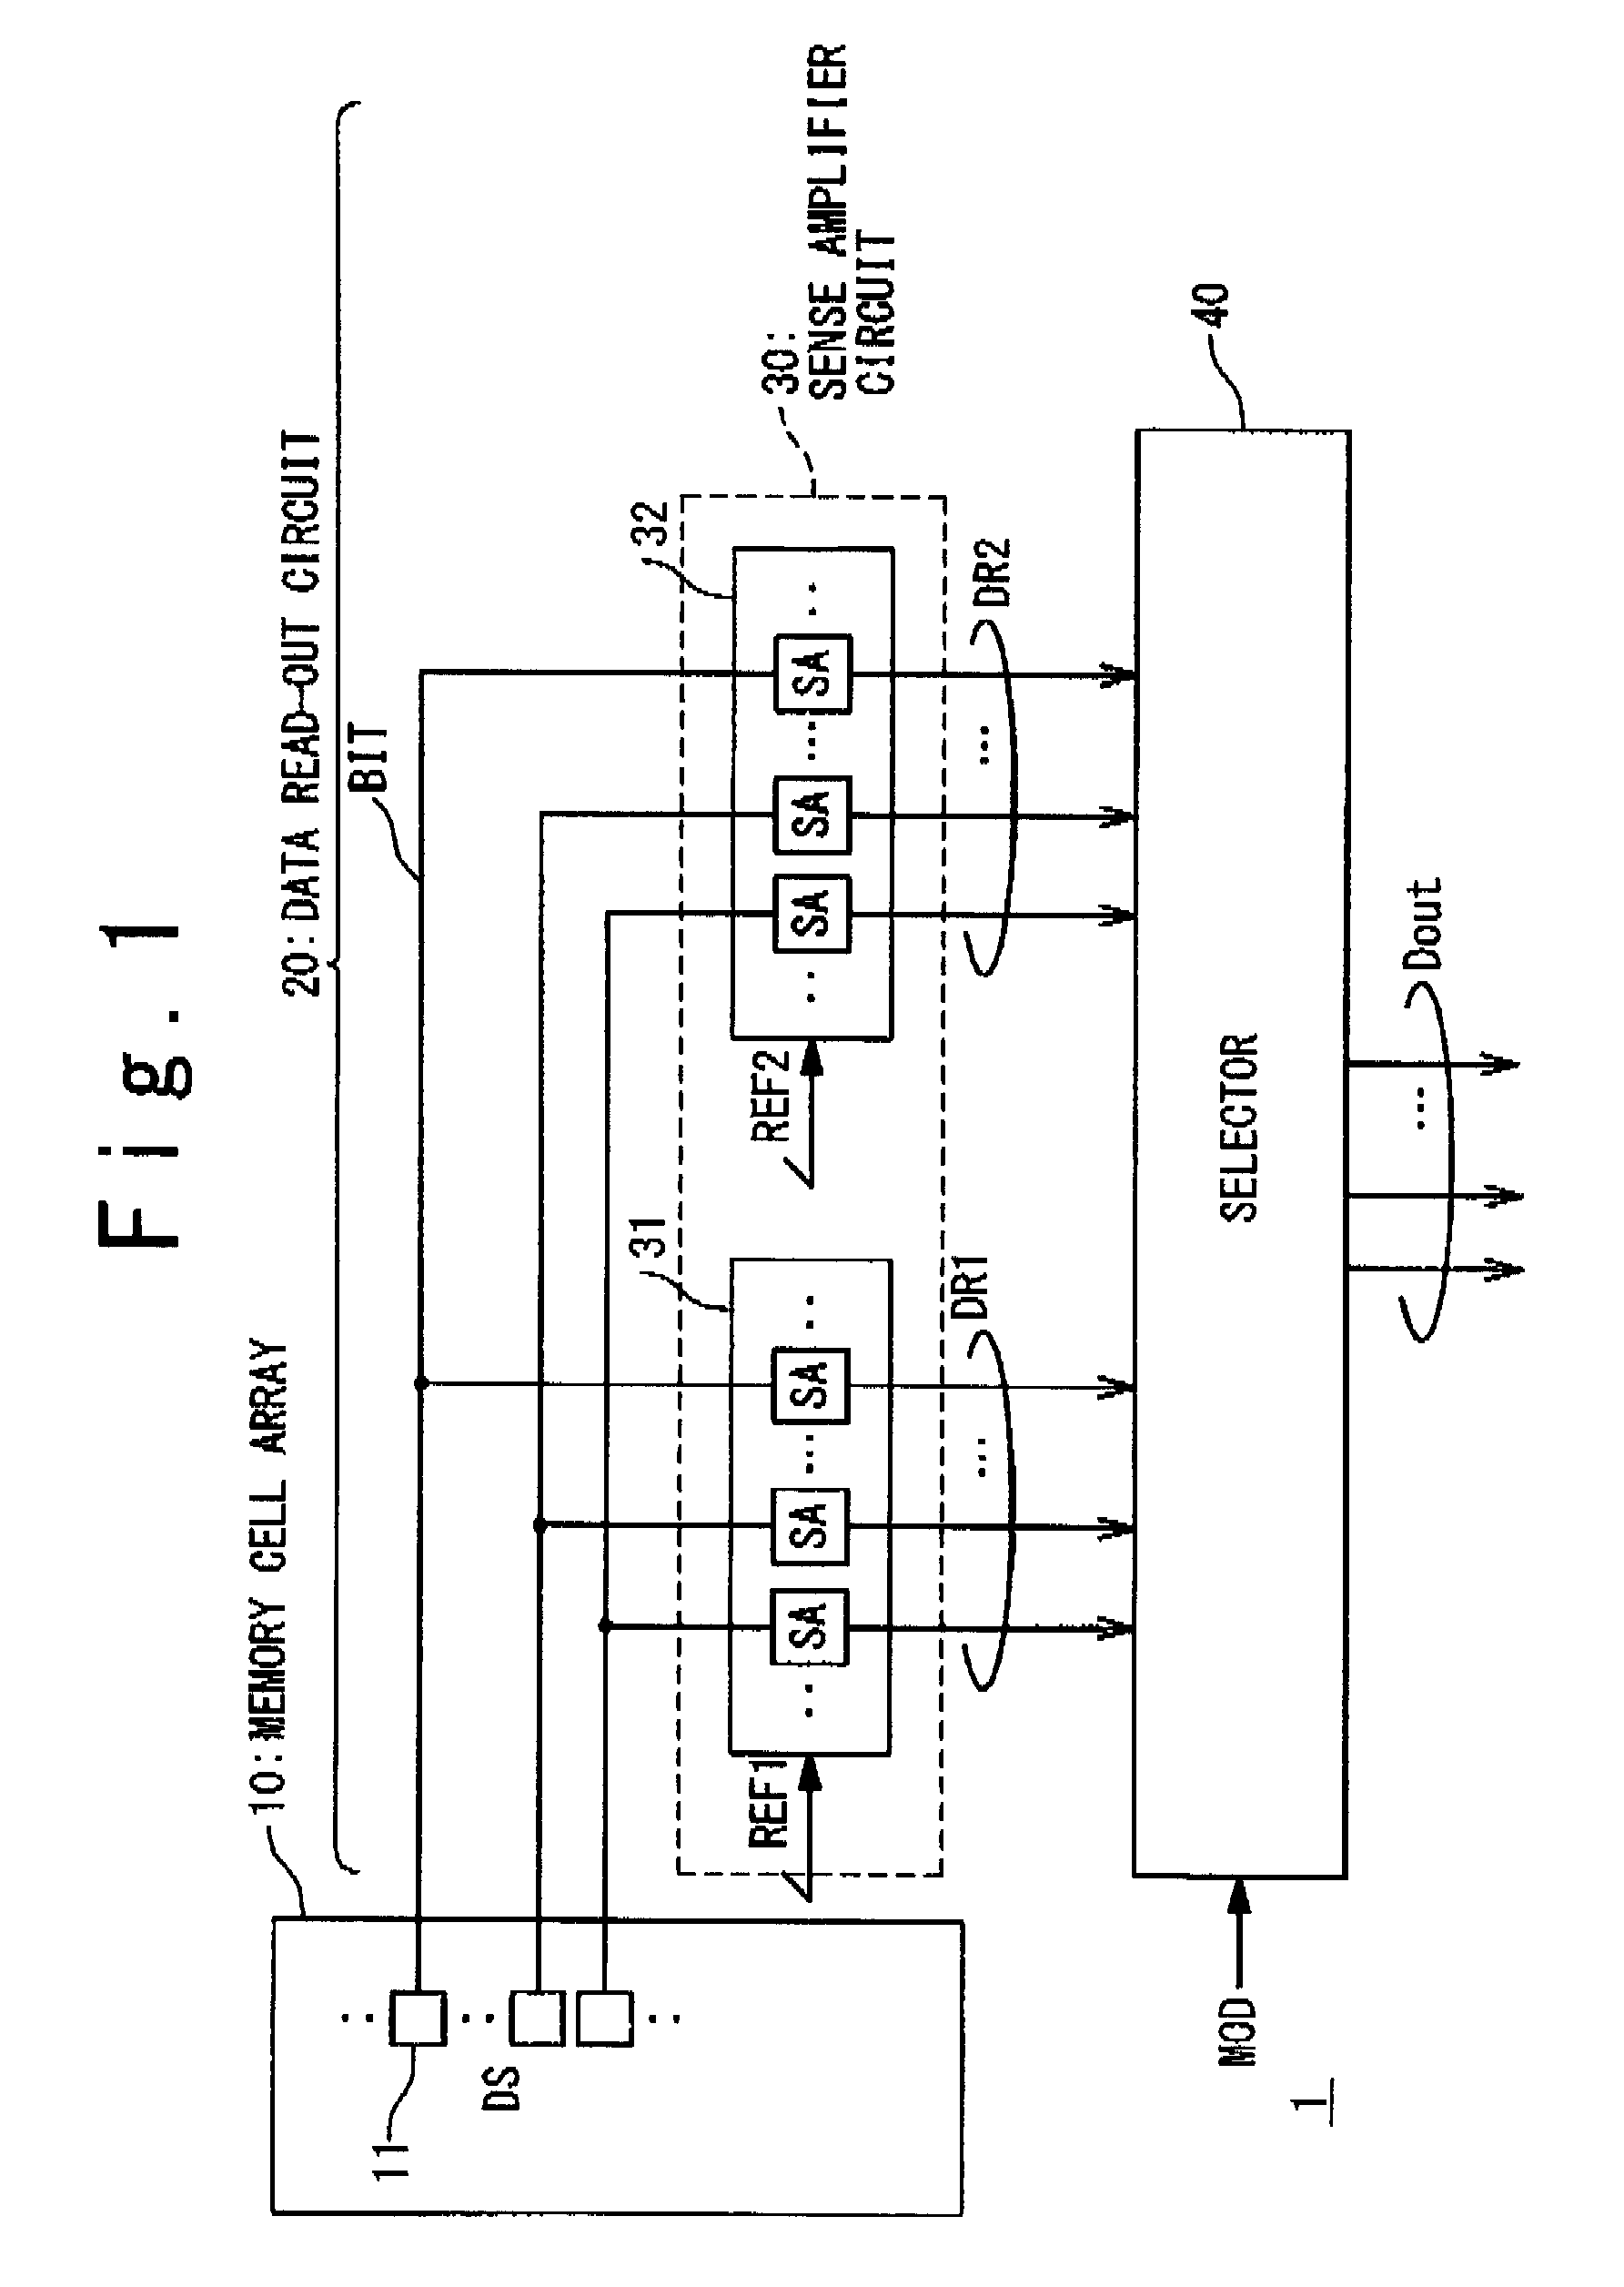 Data read-out circuit in semiconductor memory device and method of data reading in semiconductor memory device